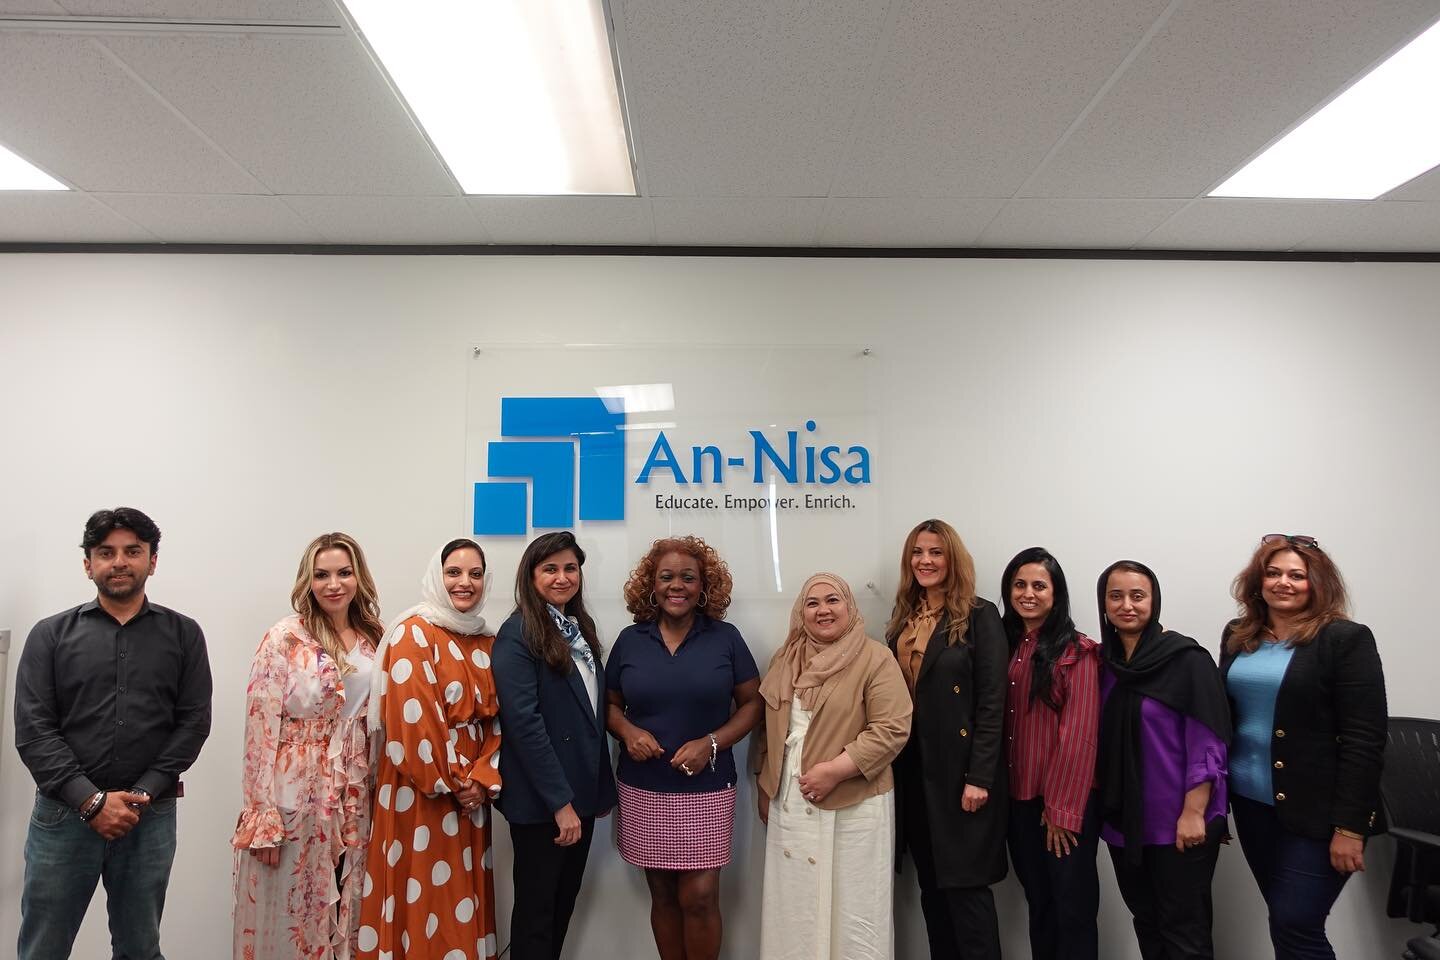 An-Nisa had the pleasure of hosting Fort Bend County Democratic Party Chairwoman, Cynthia Ginyard on Friday, March 8th! Our Directors and team members engaged in a wonderful discussion with the Chairwoman about our current efforts in the community in